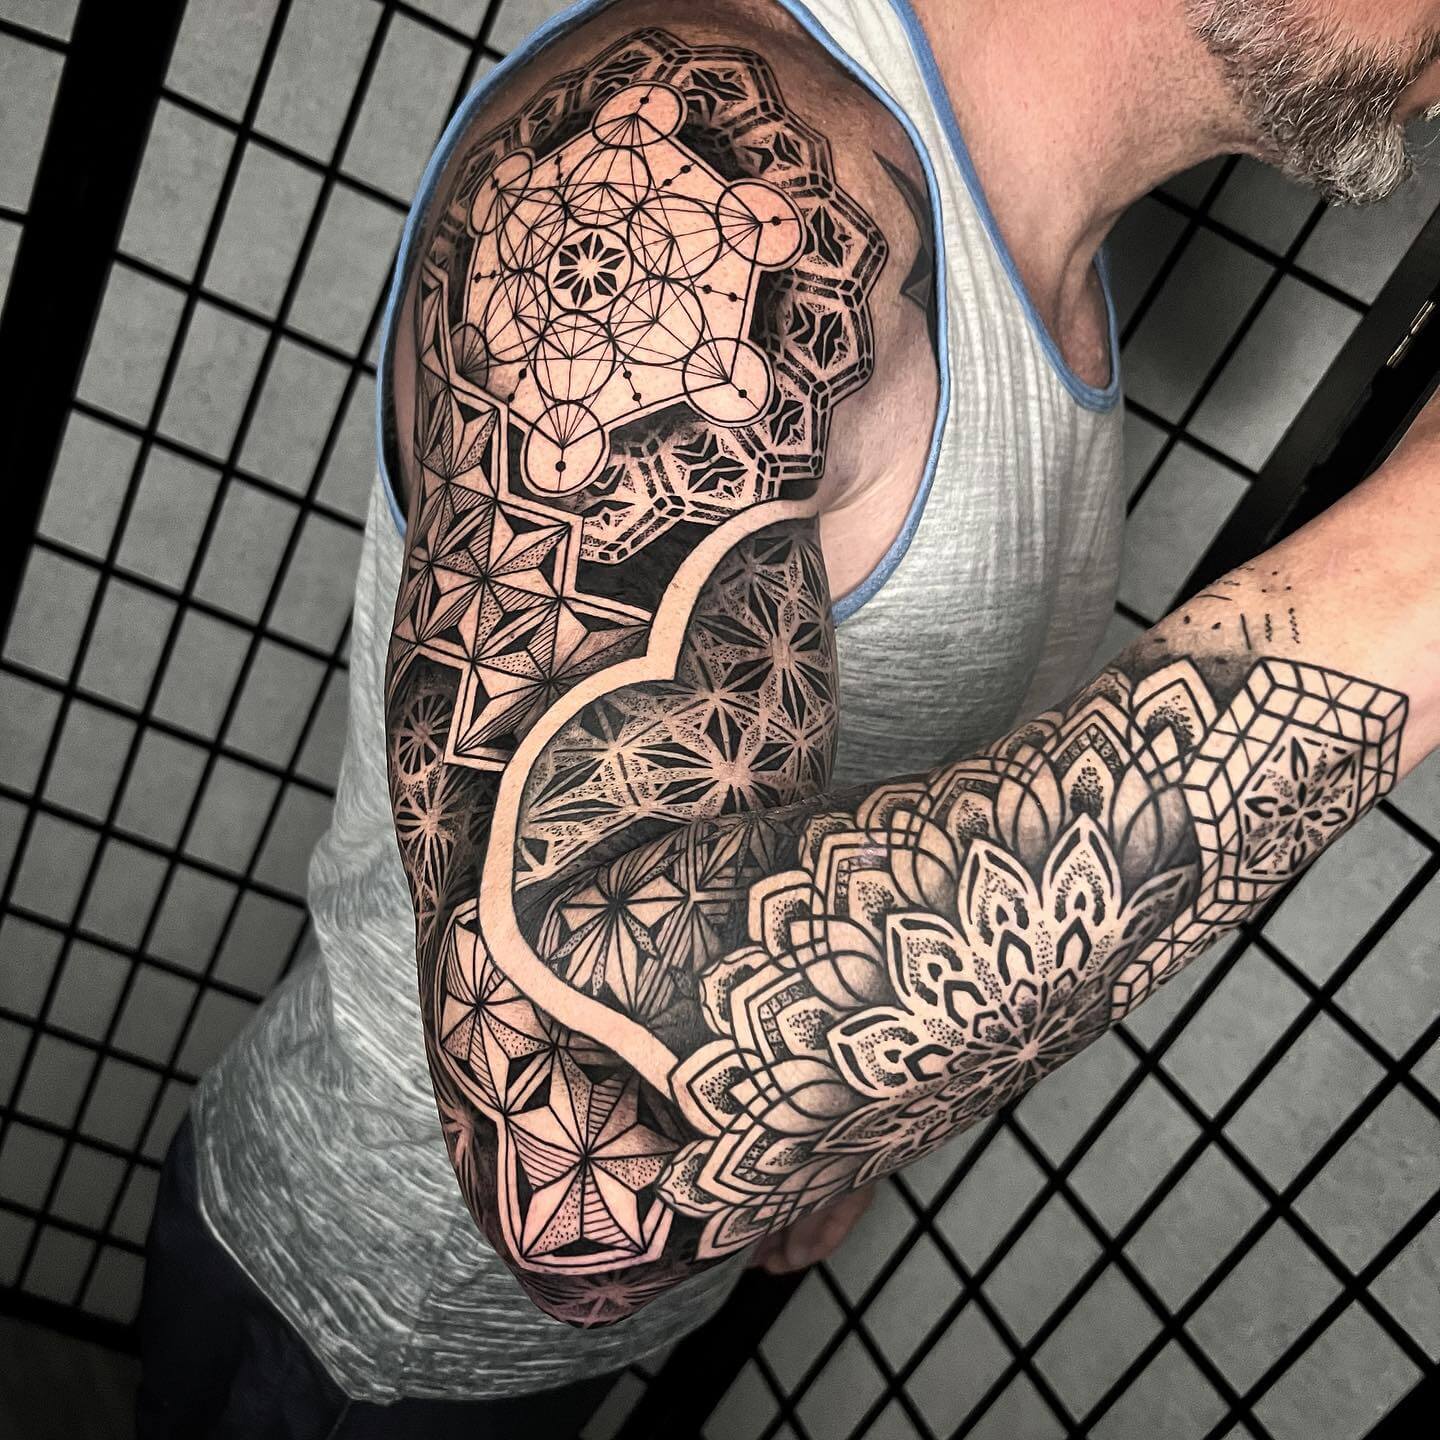 Super intricate Japanese-inspired geometric tattoo sleeve by  @jessimanchester. Swipe to the side to see a closer look. The details are…  | Instagram